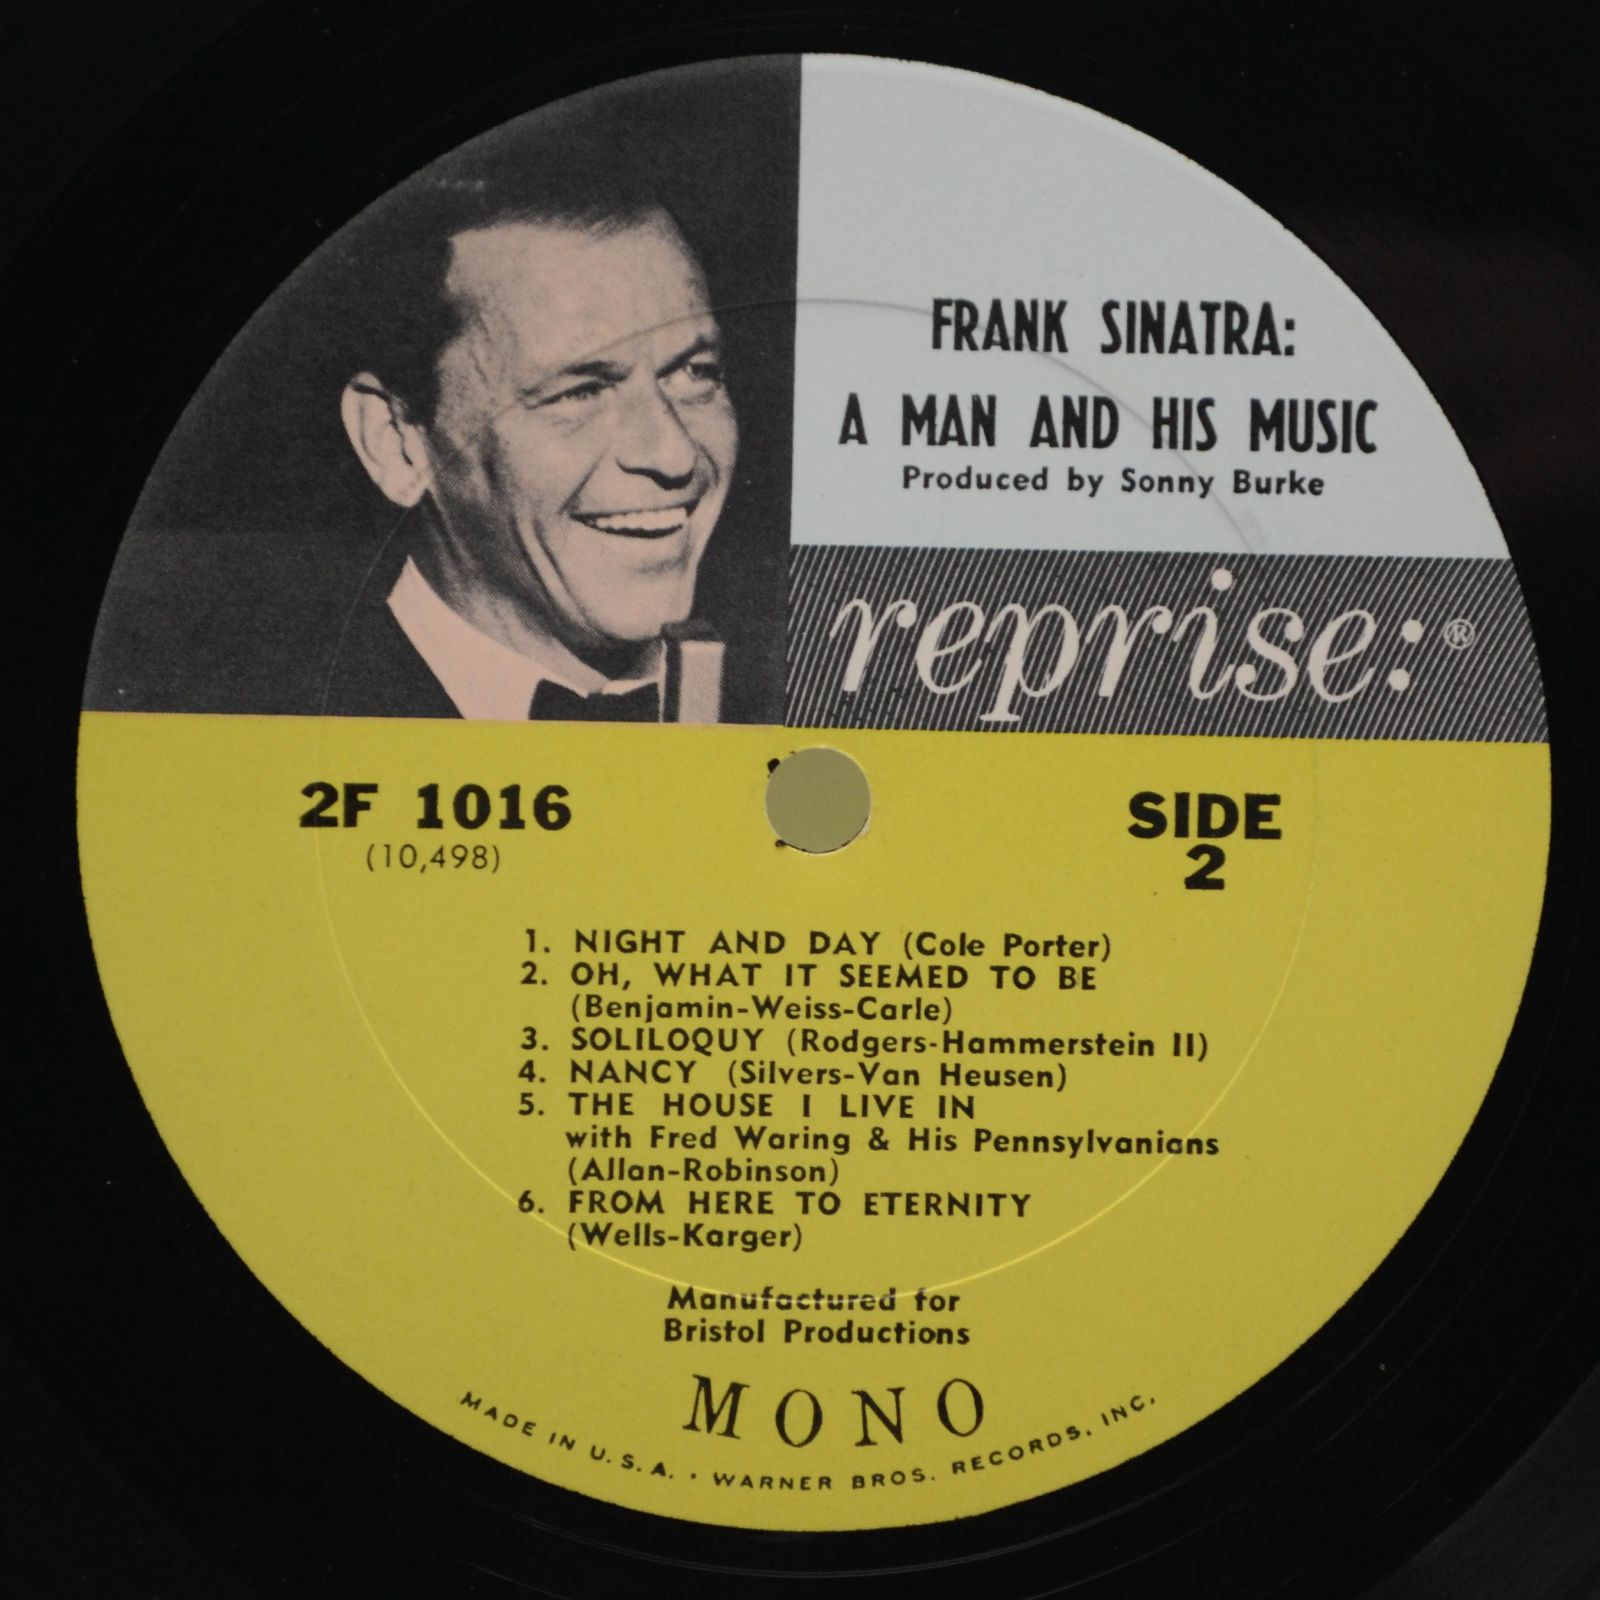 Frank Sinatra — A Man And His Music (2LP, 1-st, USA), 1965